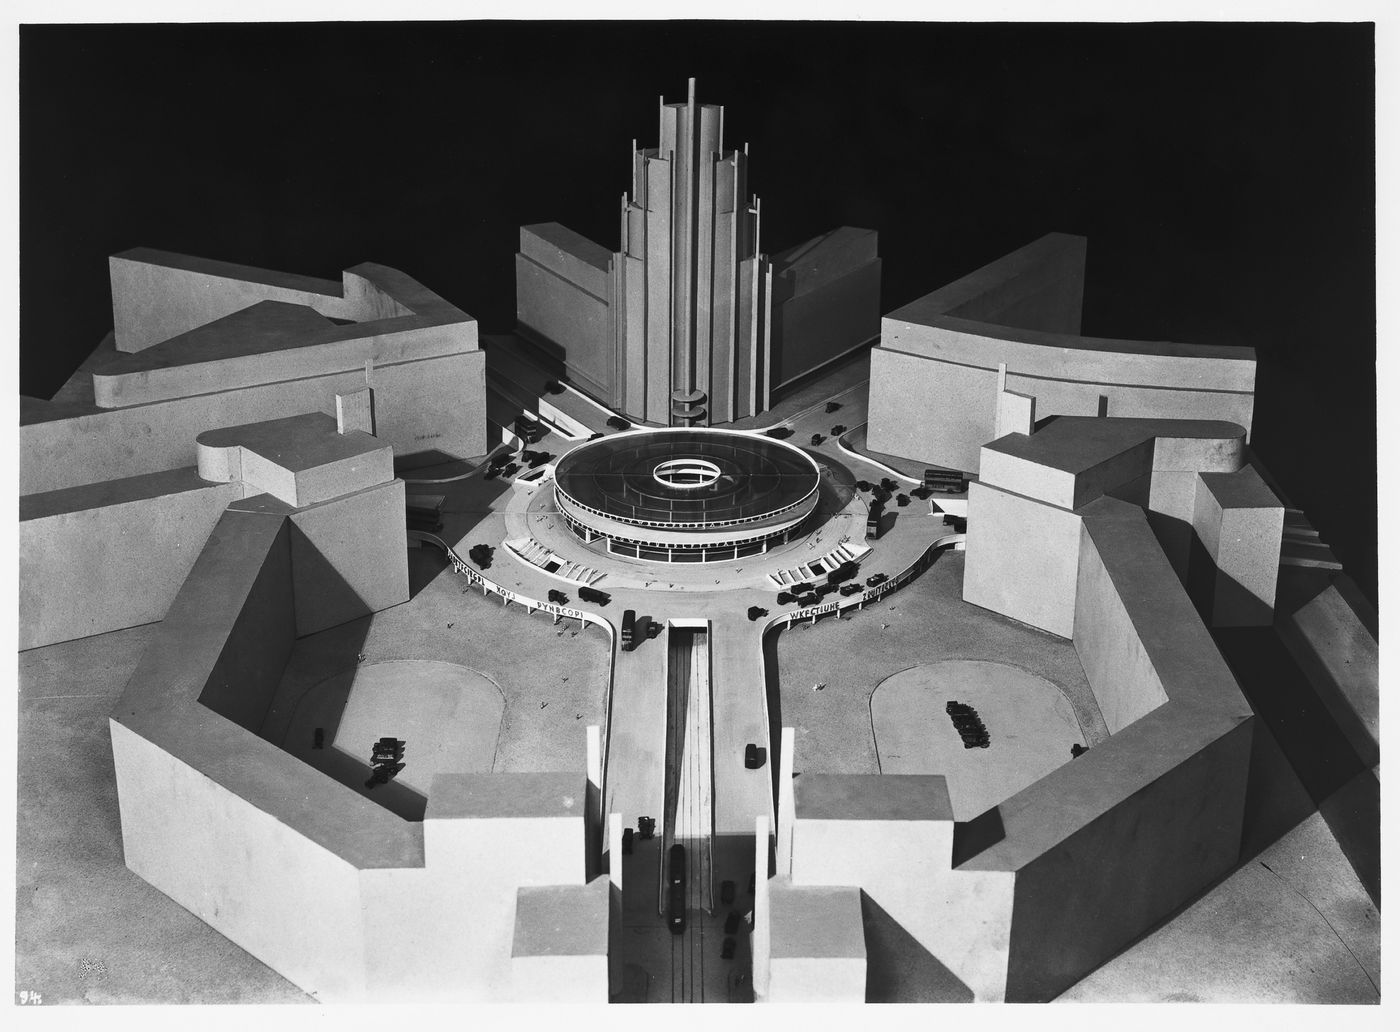 Photograph of a model for the urban renewal of Potsdamer and Leipziger Platz, Berlin